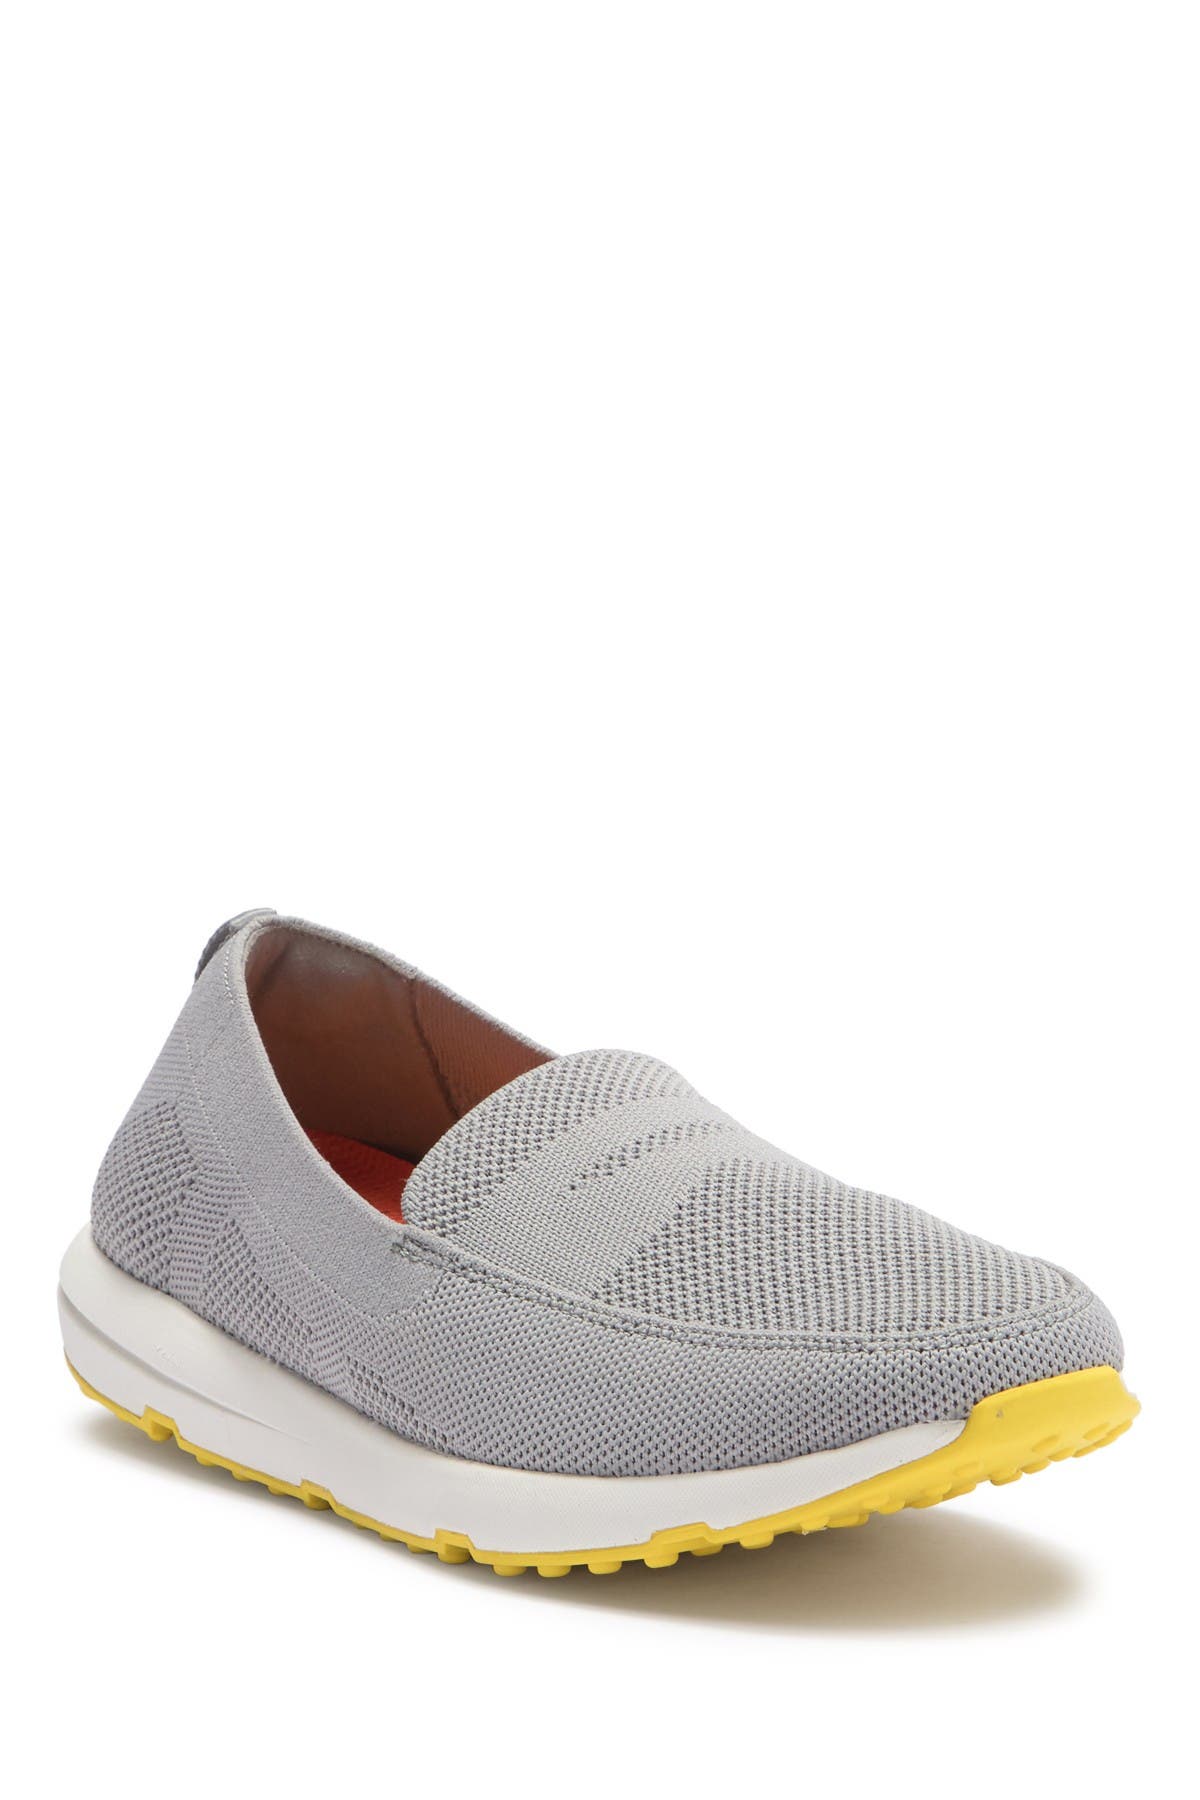 Swims | Breeze Leap Knit Penny Loafer 